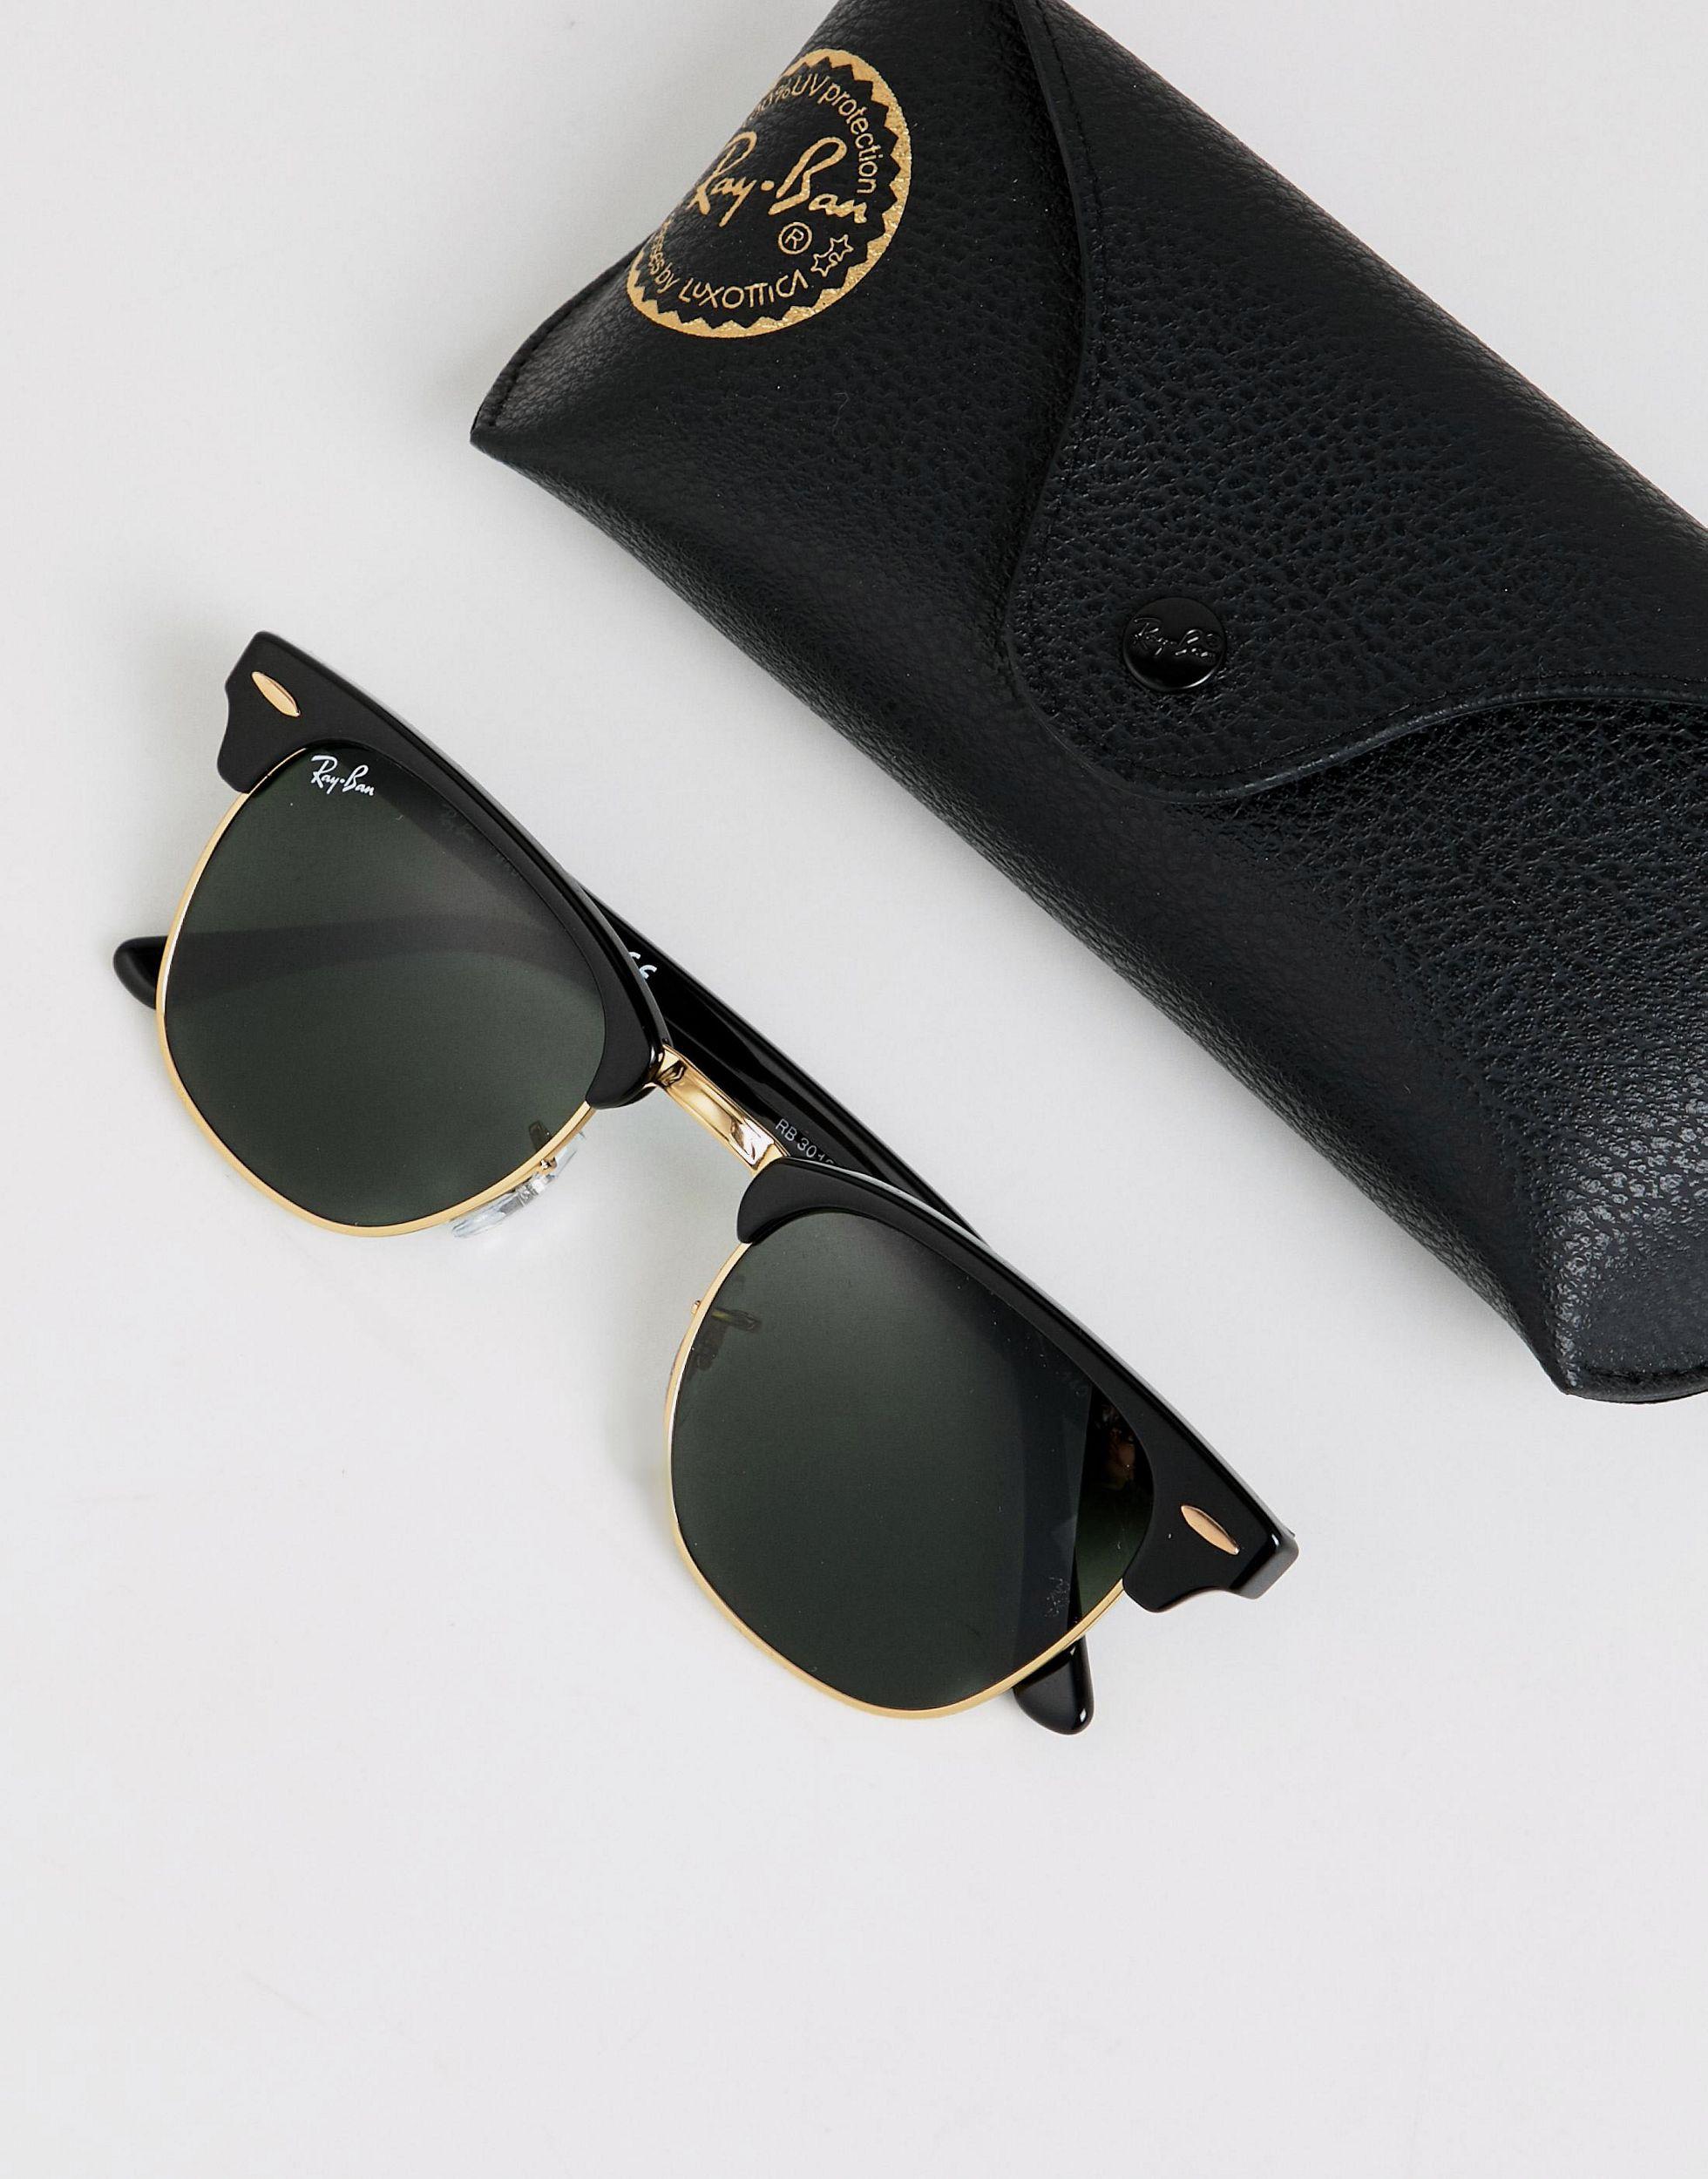 Ray Ban Clubmaster Sunglasses 0rb3016 Black Lyst